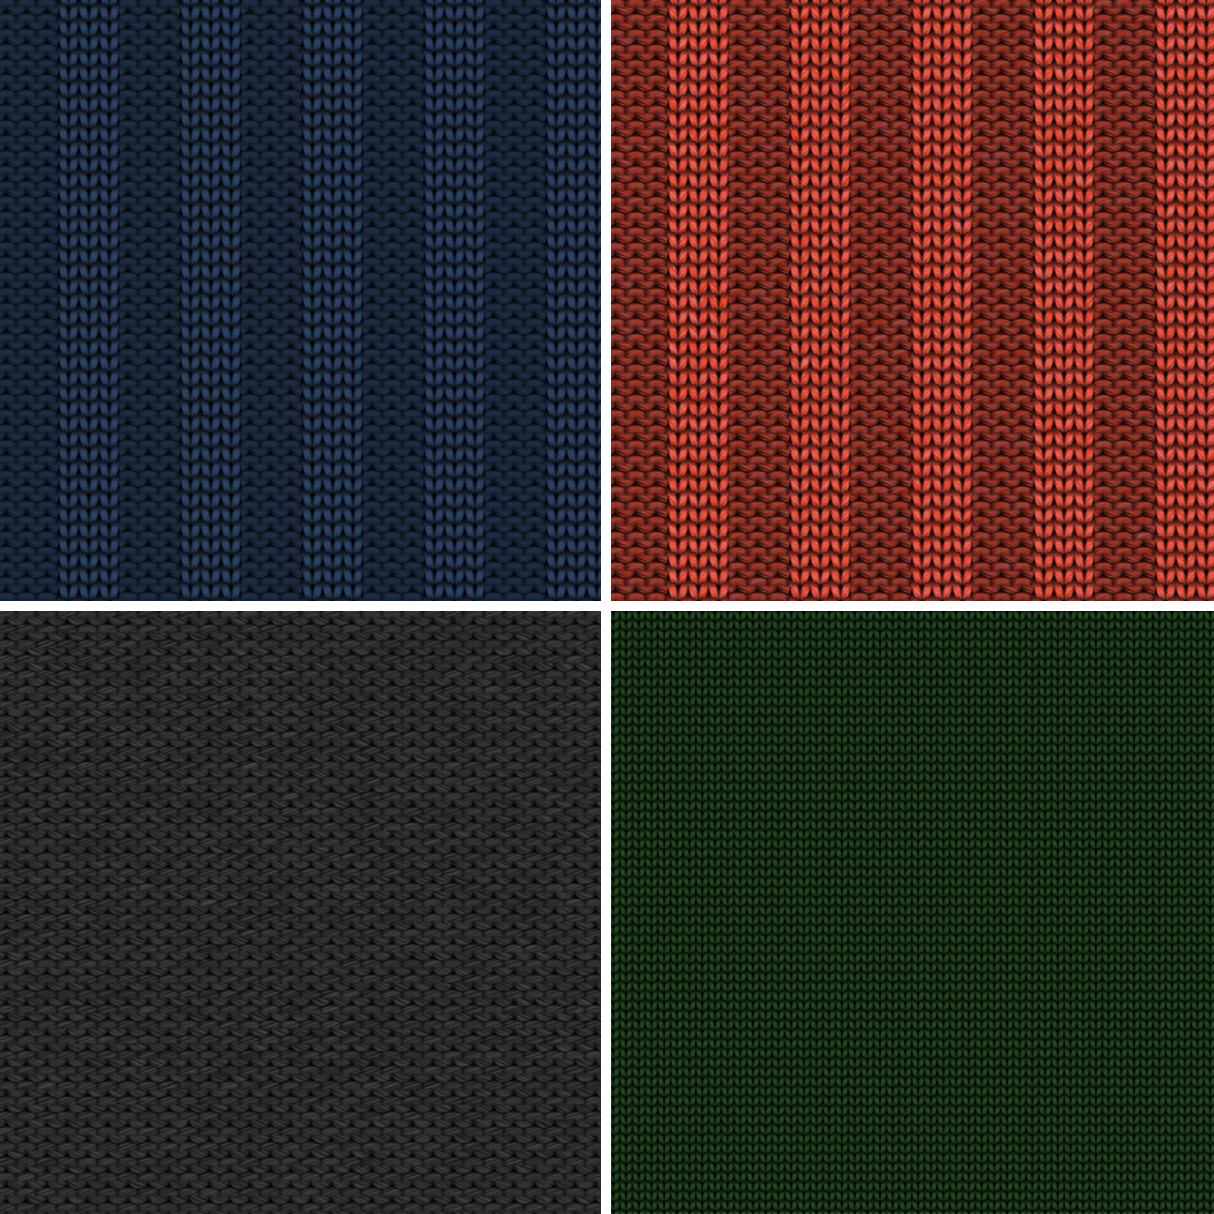 30 Knitted Background Textures Samples Preview – Part 5